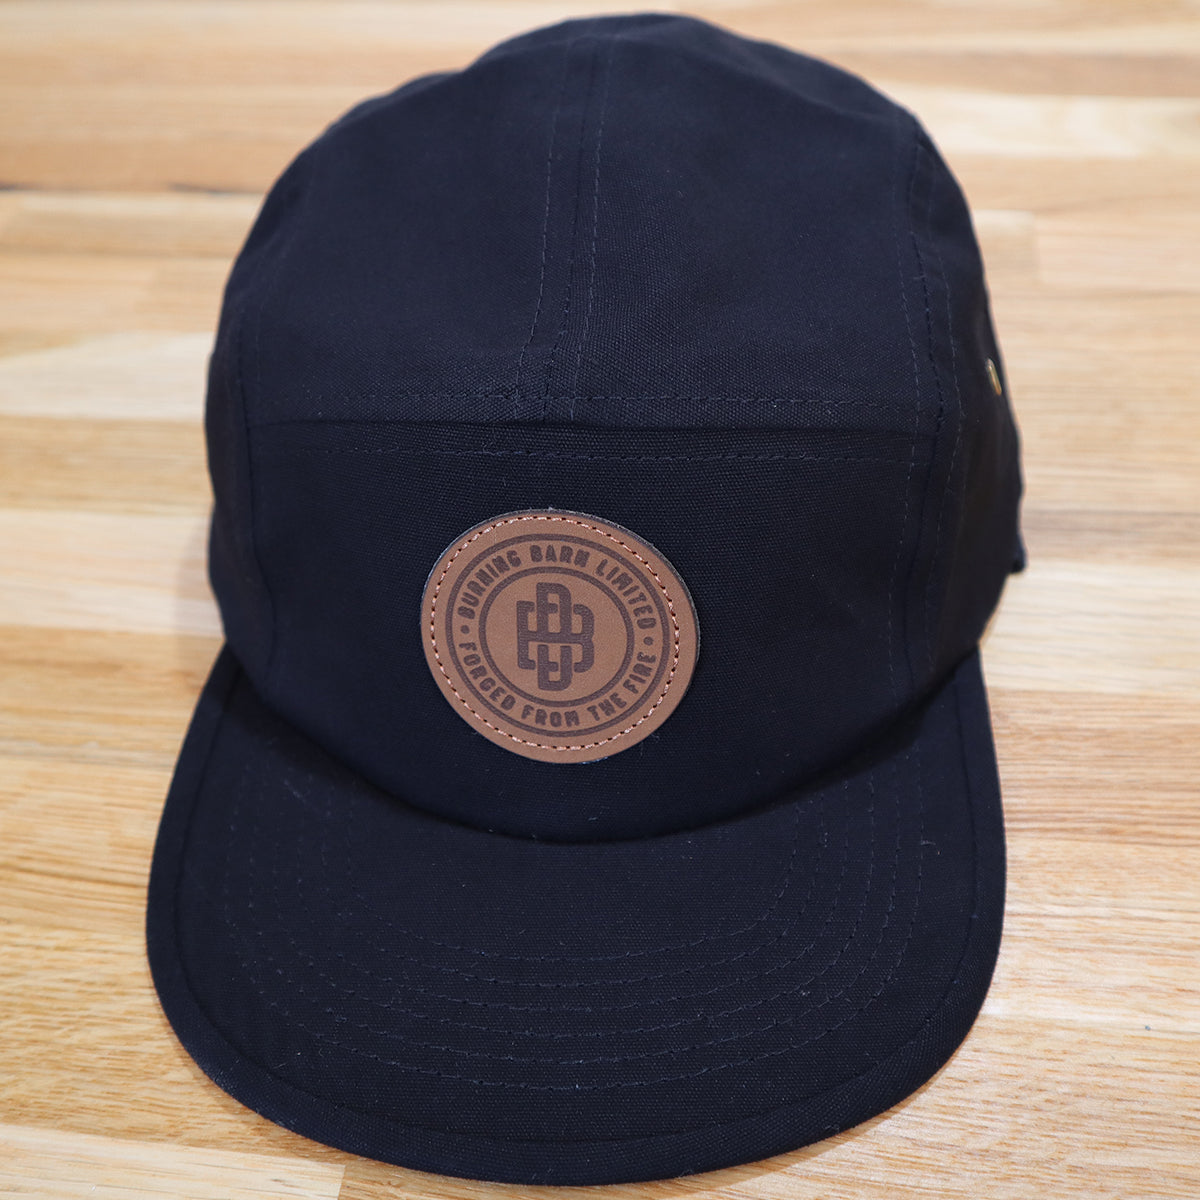 Front view of a black cap with Burning Barn logo imprinted on the front